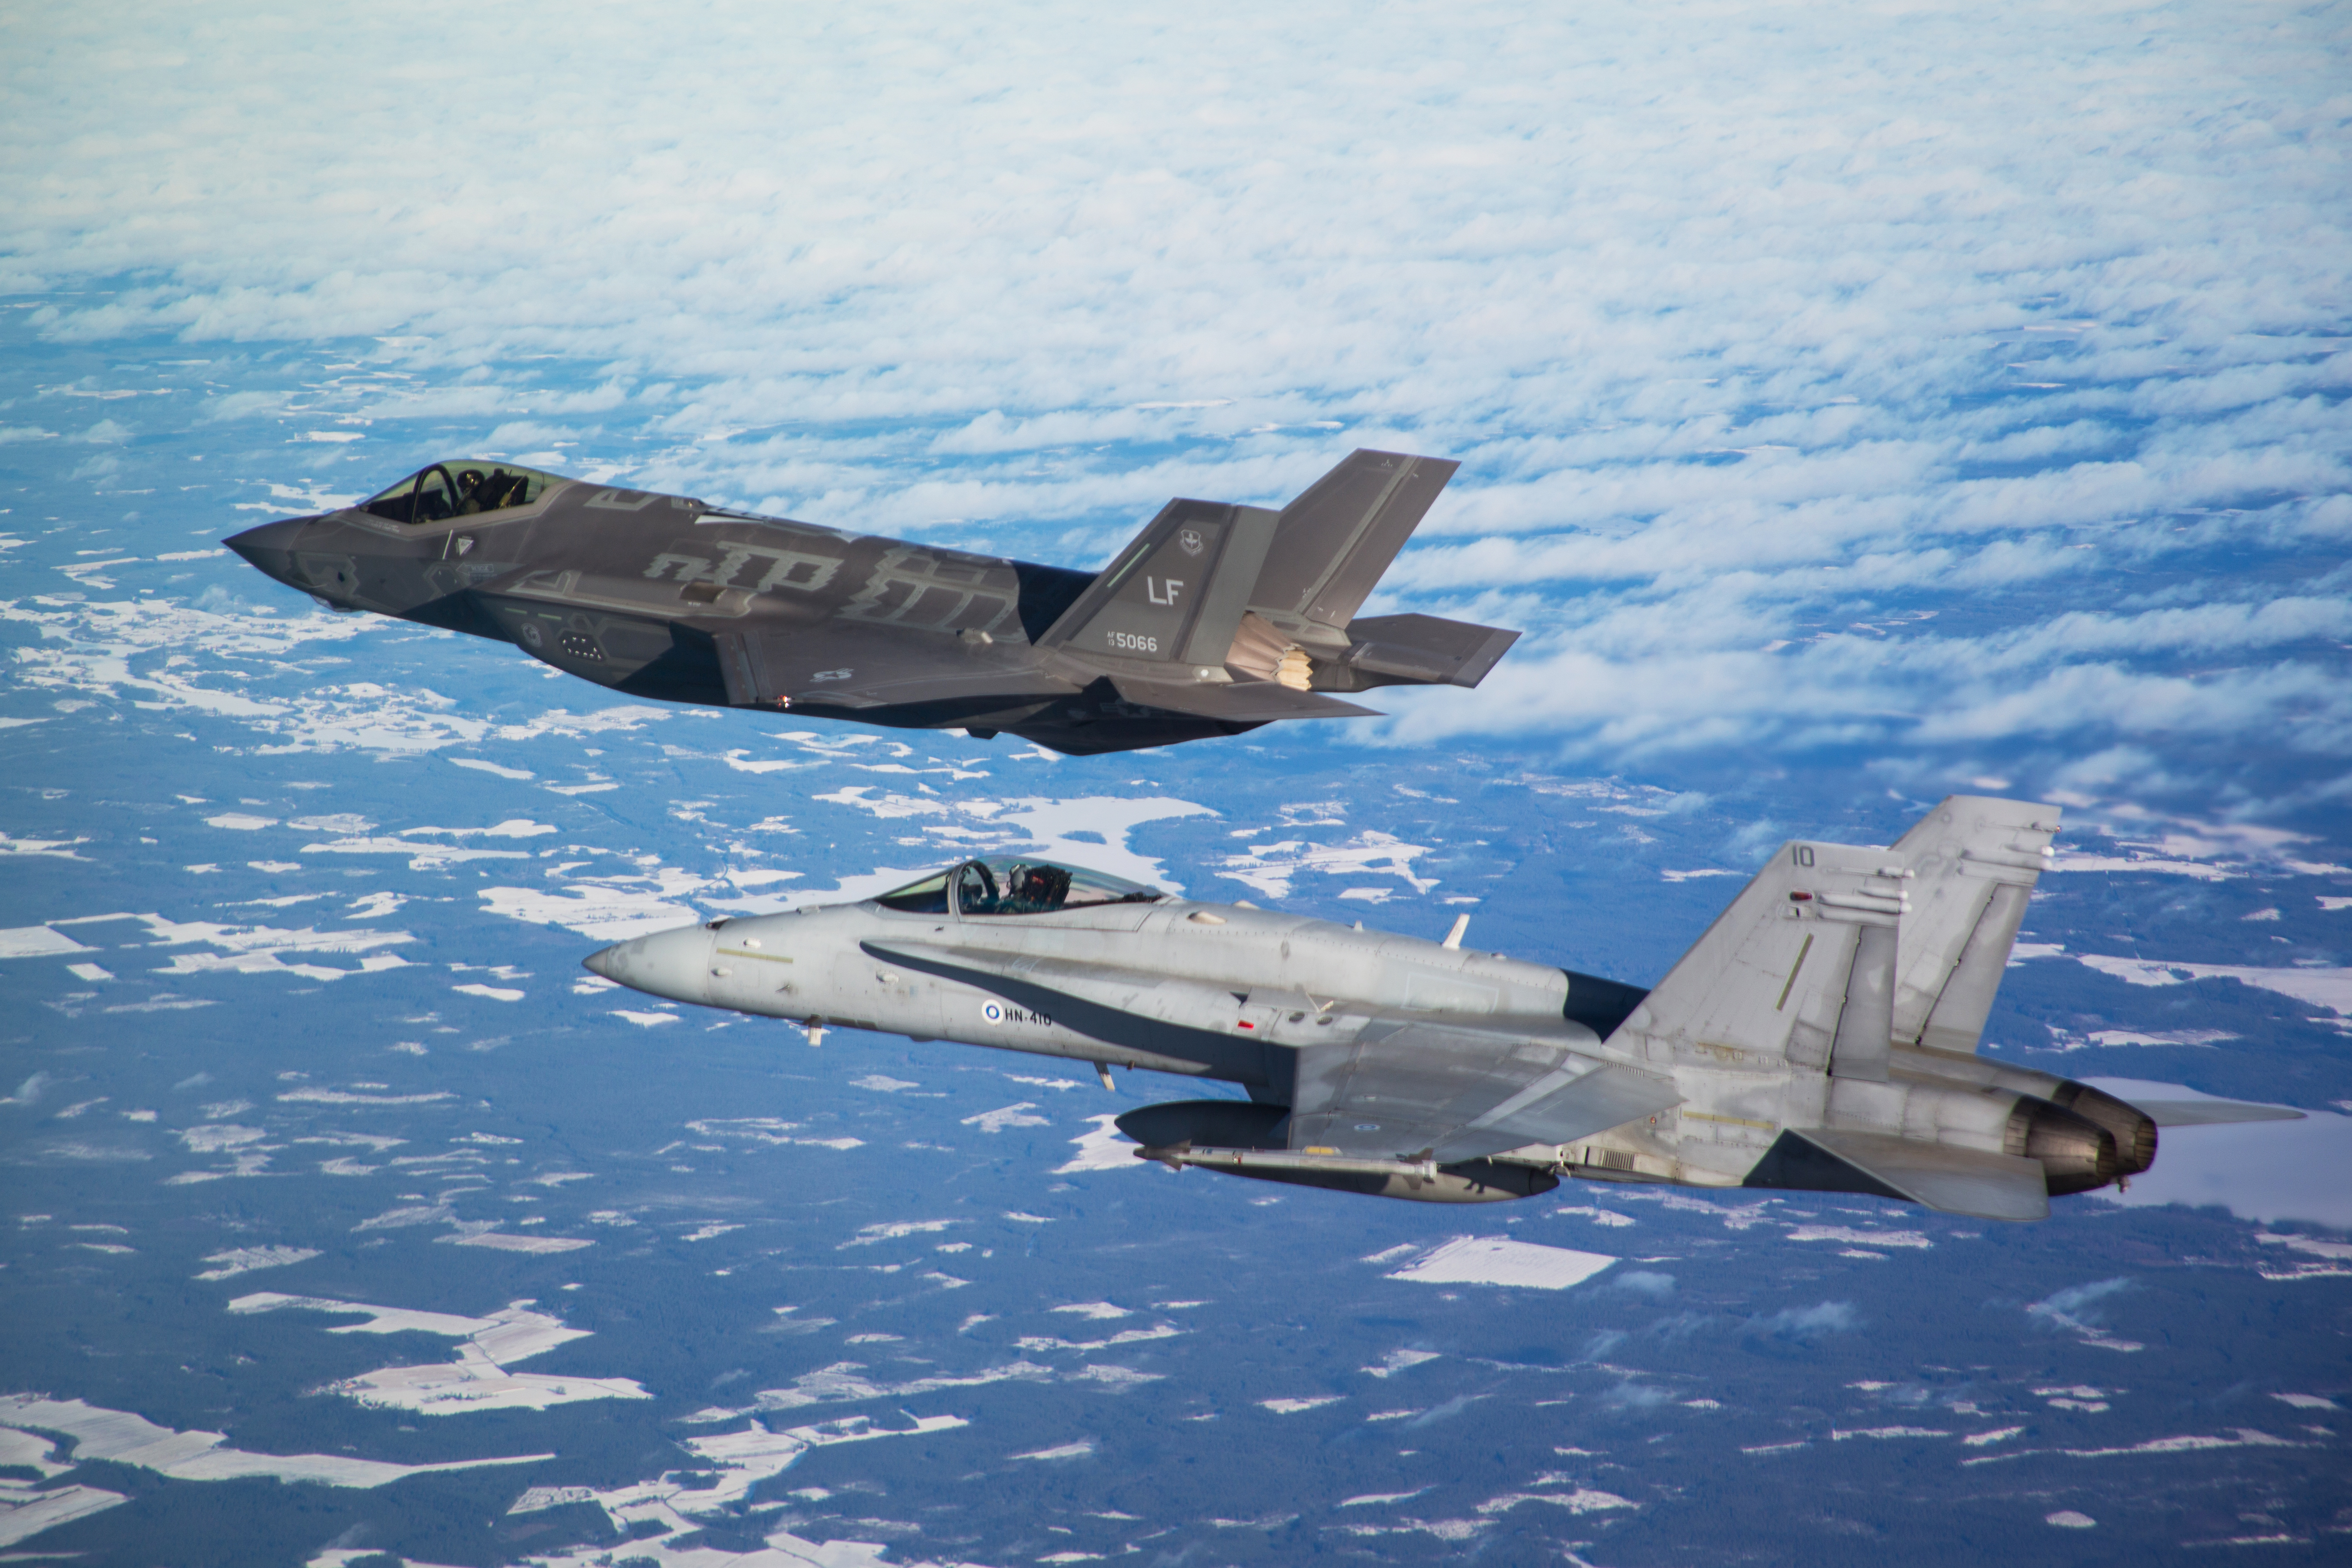 The Lockheed Martin F-35A Lightning II is Finland's next multi-role fighter  - The Finnish Air Force